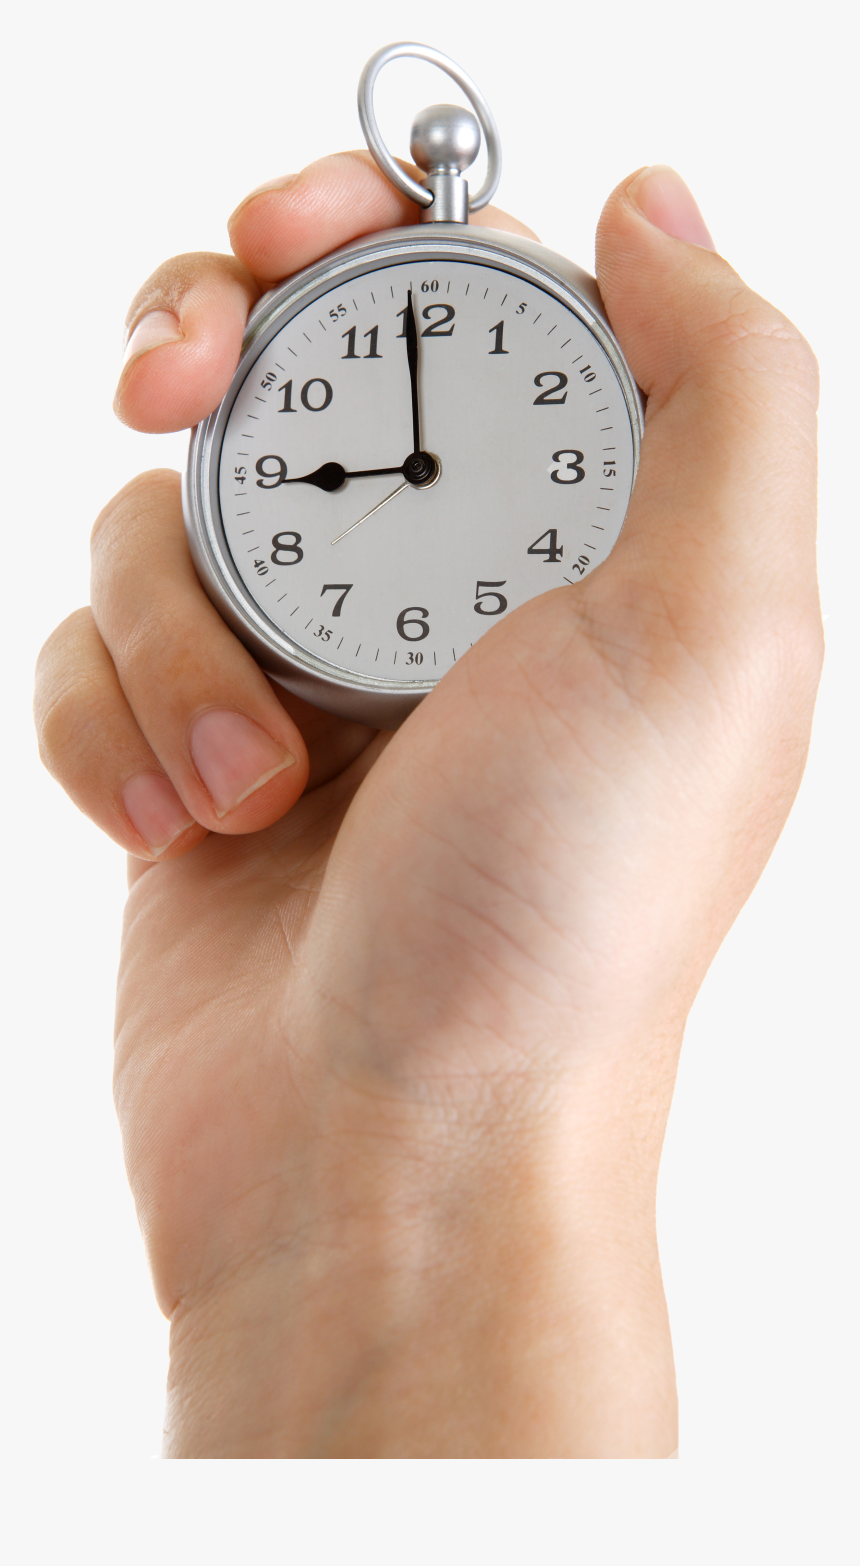 https://www.kindpng.com/picc/m/205-2057216_stopwatch-transparent-wrist-timer-in-hand-png-png.png